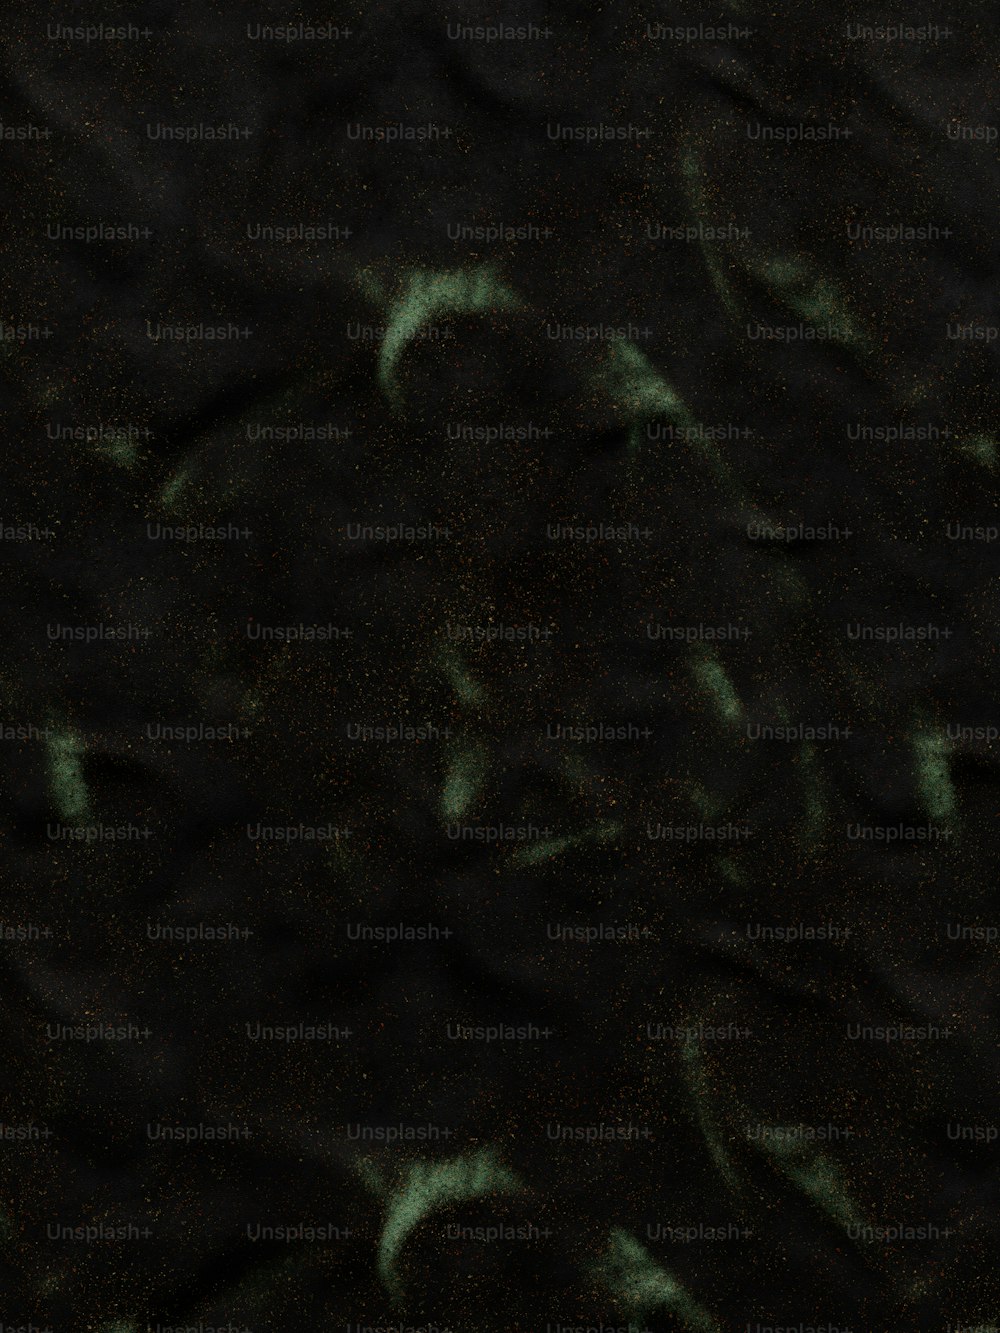 a blurry image of a black background with white stars